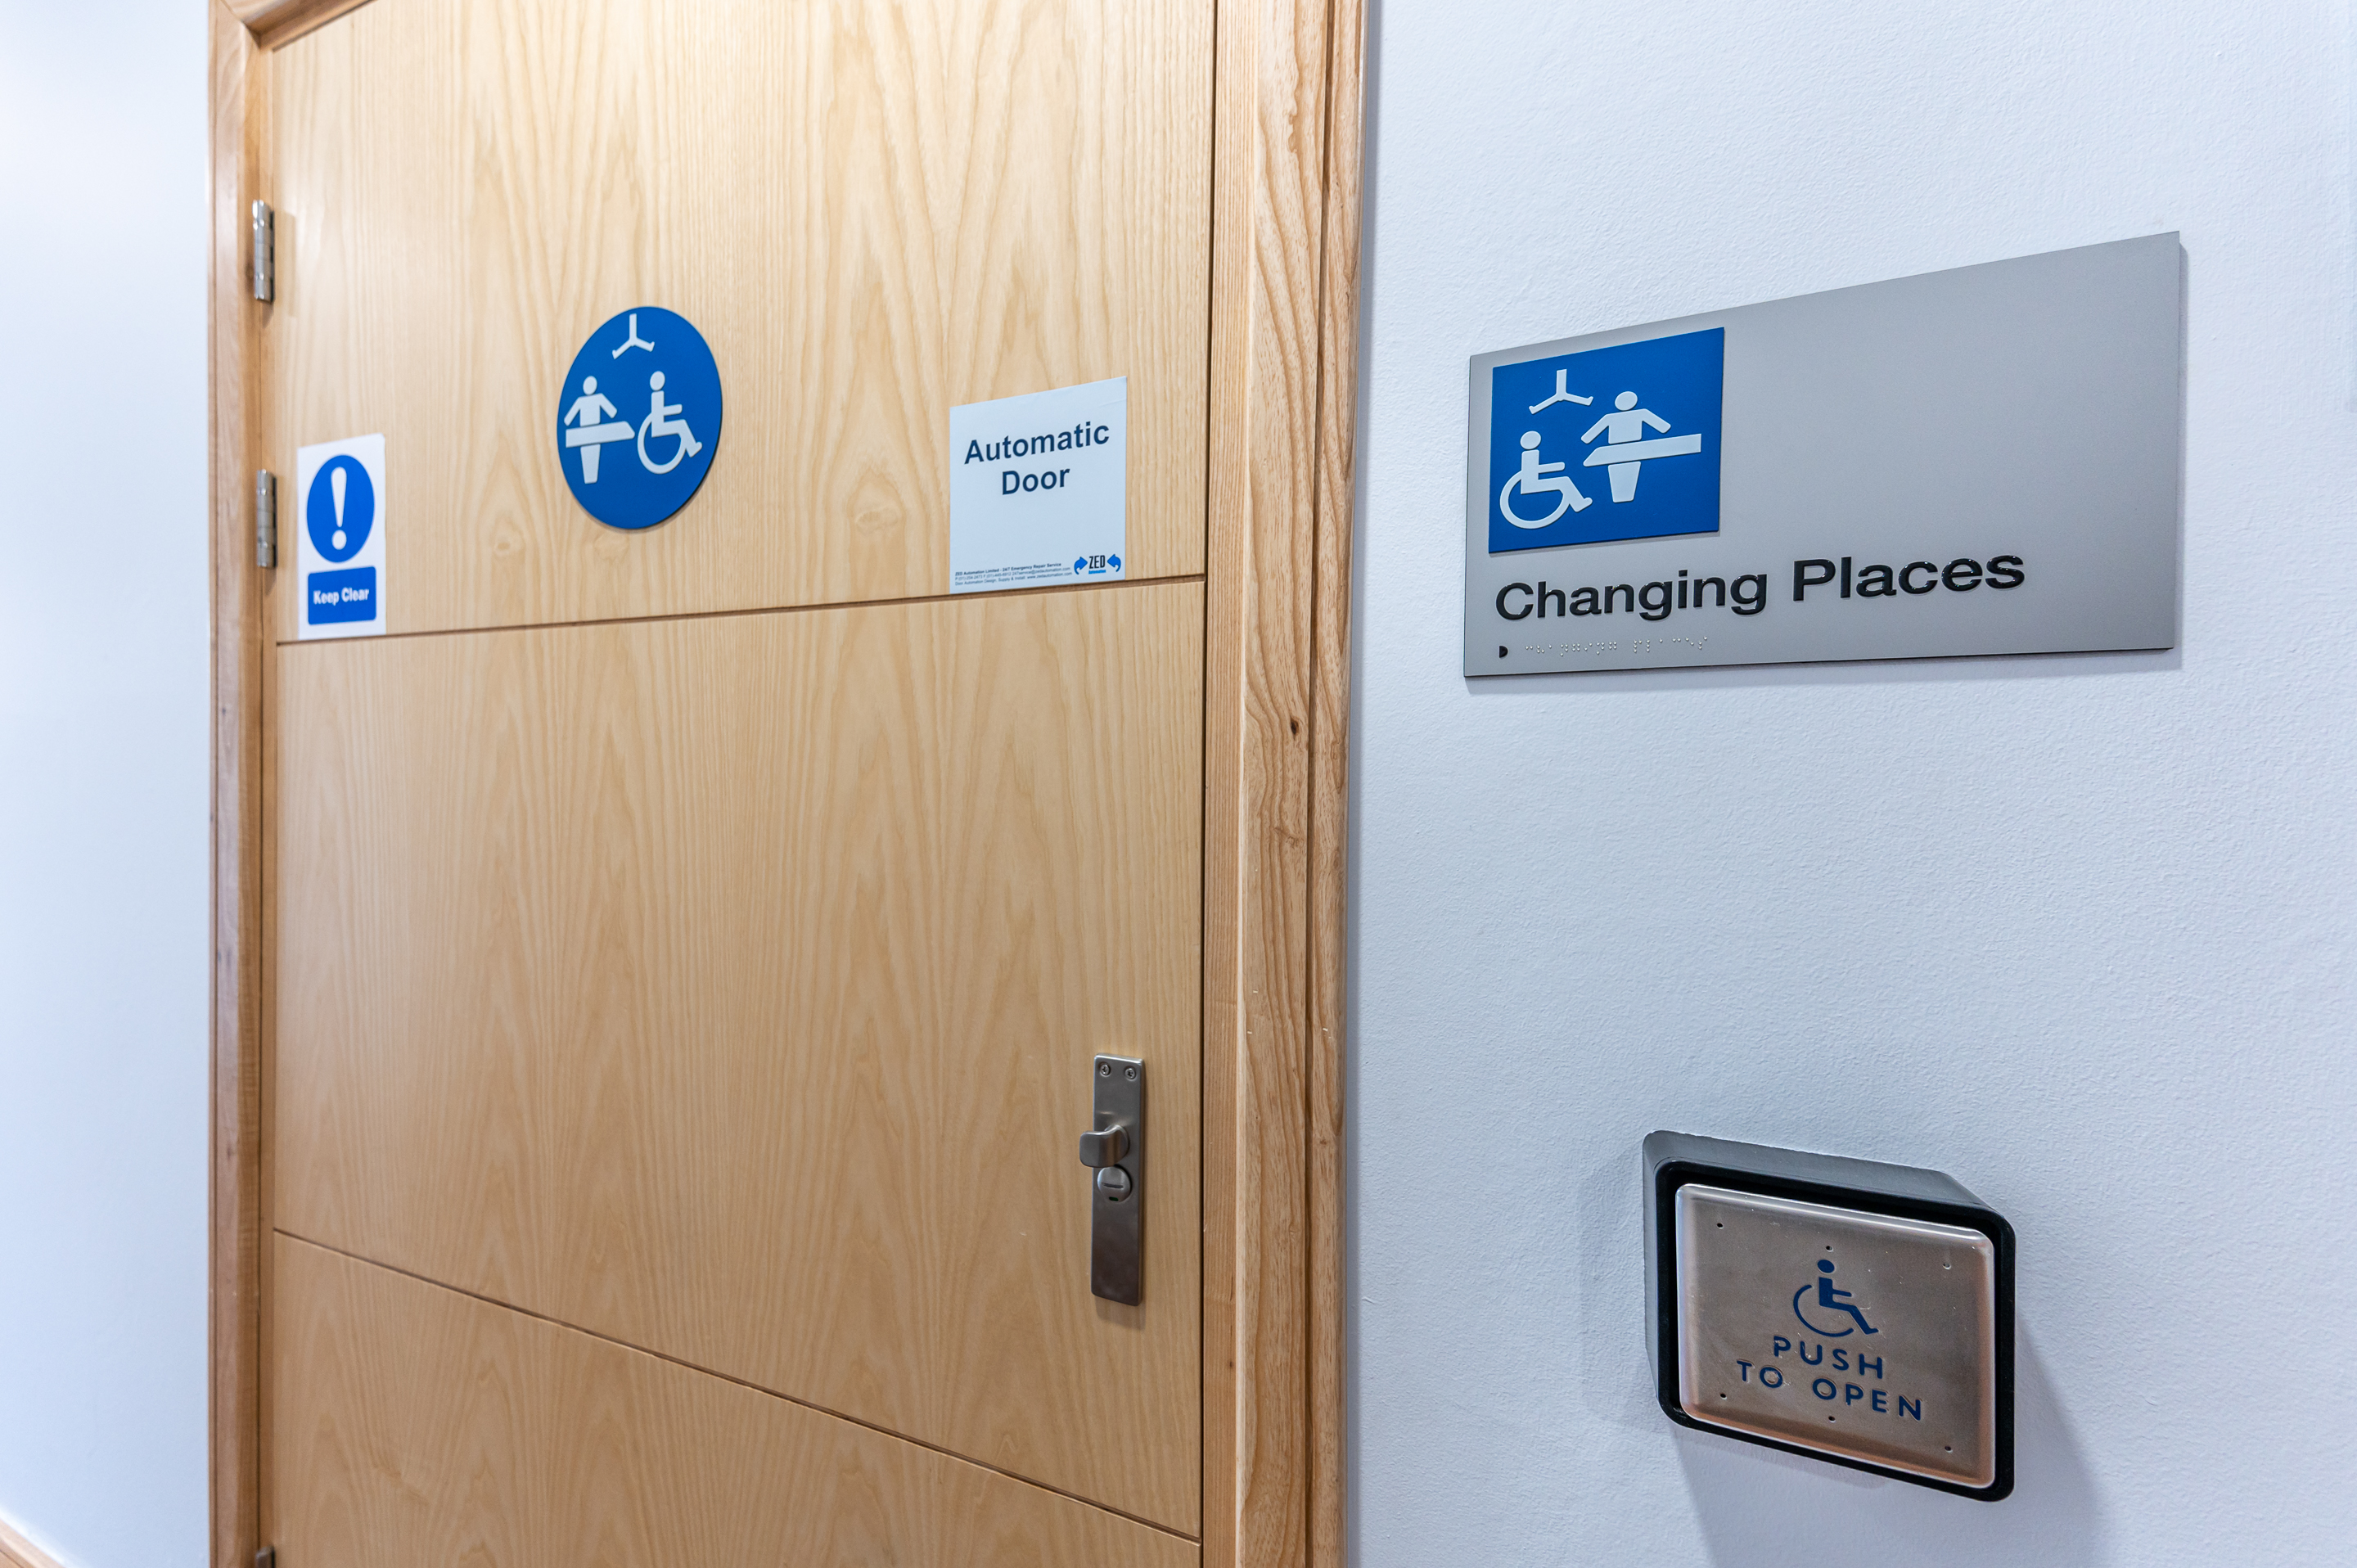 Entrance to County Hall Changing Places toilet facility